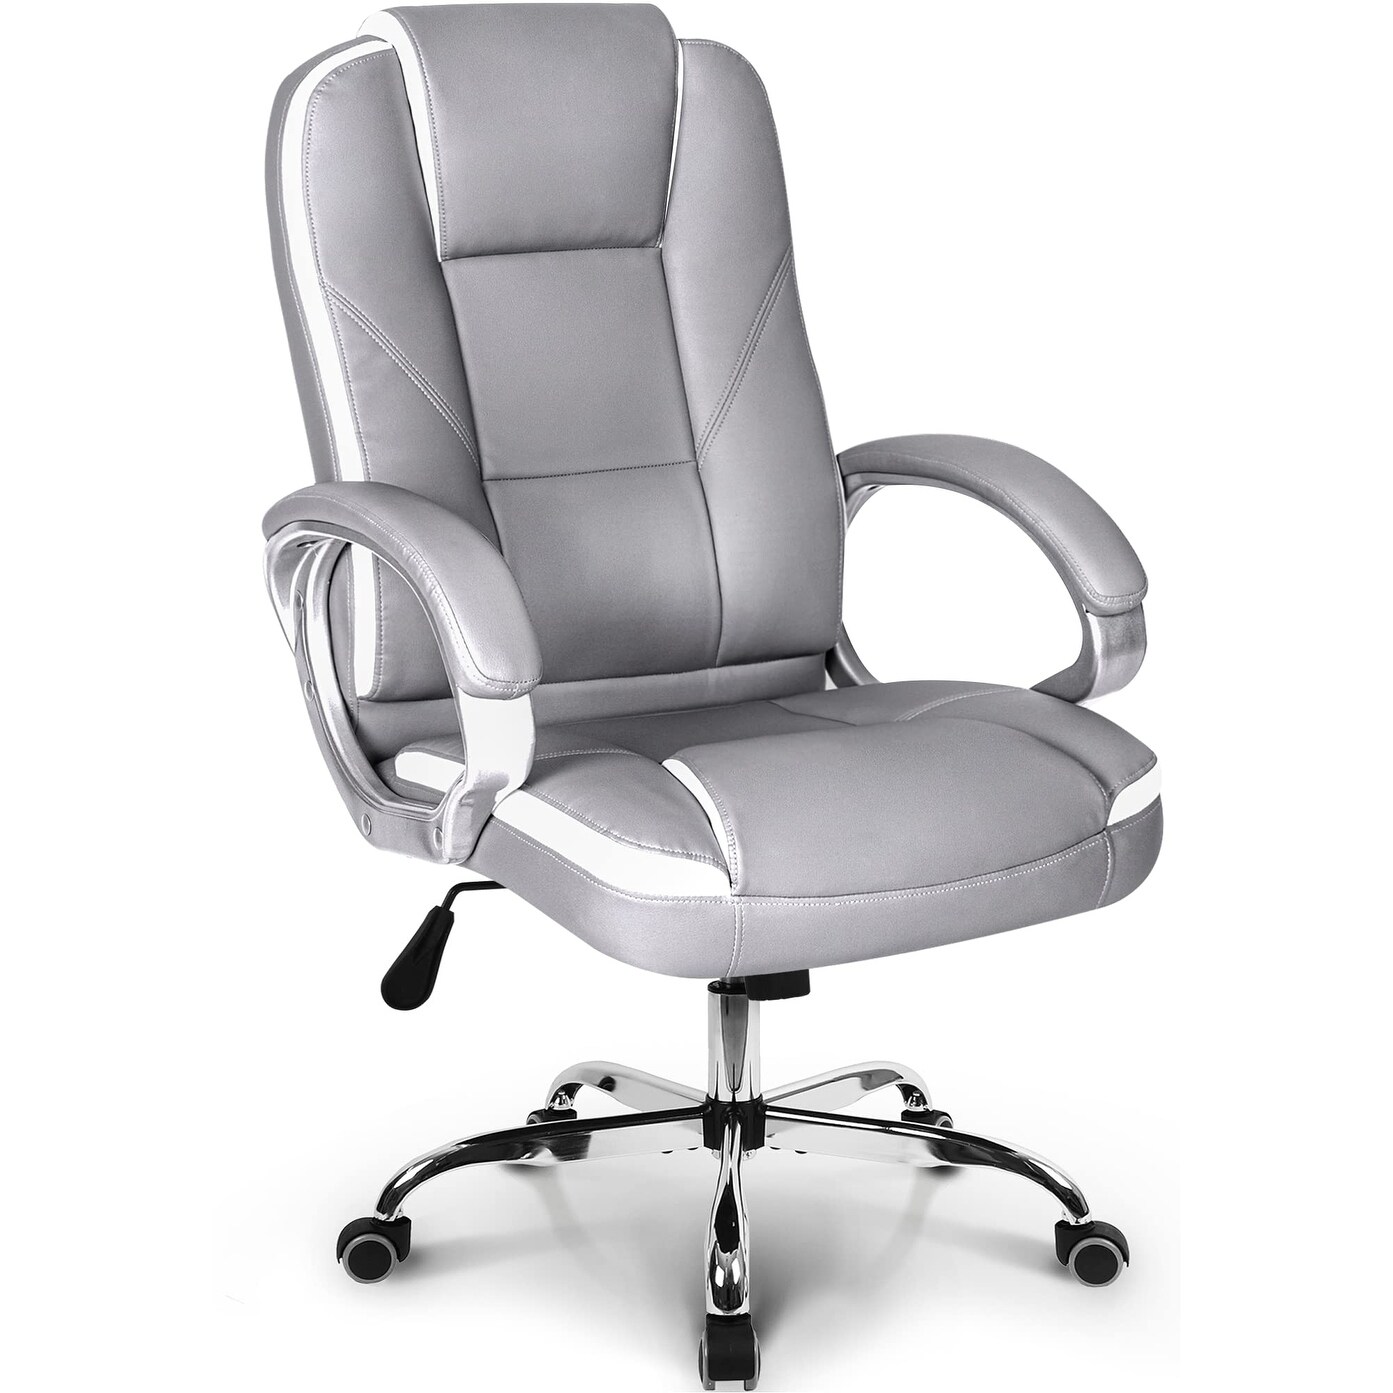 https://ak1.ostkcdn.com/images/products/is/images/direct/3ebce0cb1b9227200977e112e21f715fba8c9b8c/Office-Chair-Computer-Desk-Gaming-Ergonomic-High-Back-Cushion-Lumbar-Support-with-Wheels-Jet-Racing-Seat-Adjustable-Swivel.jpg